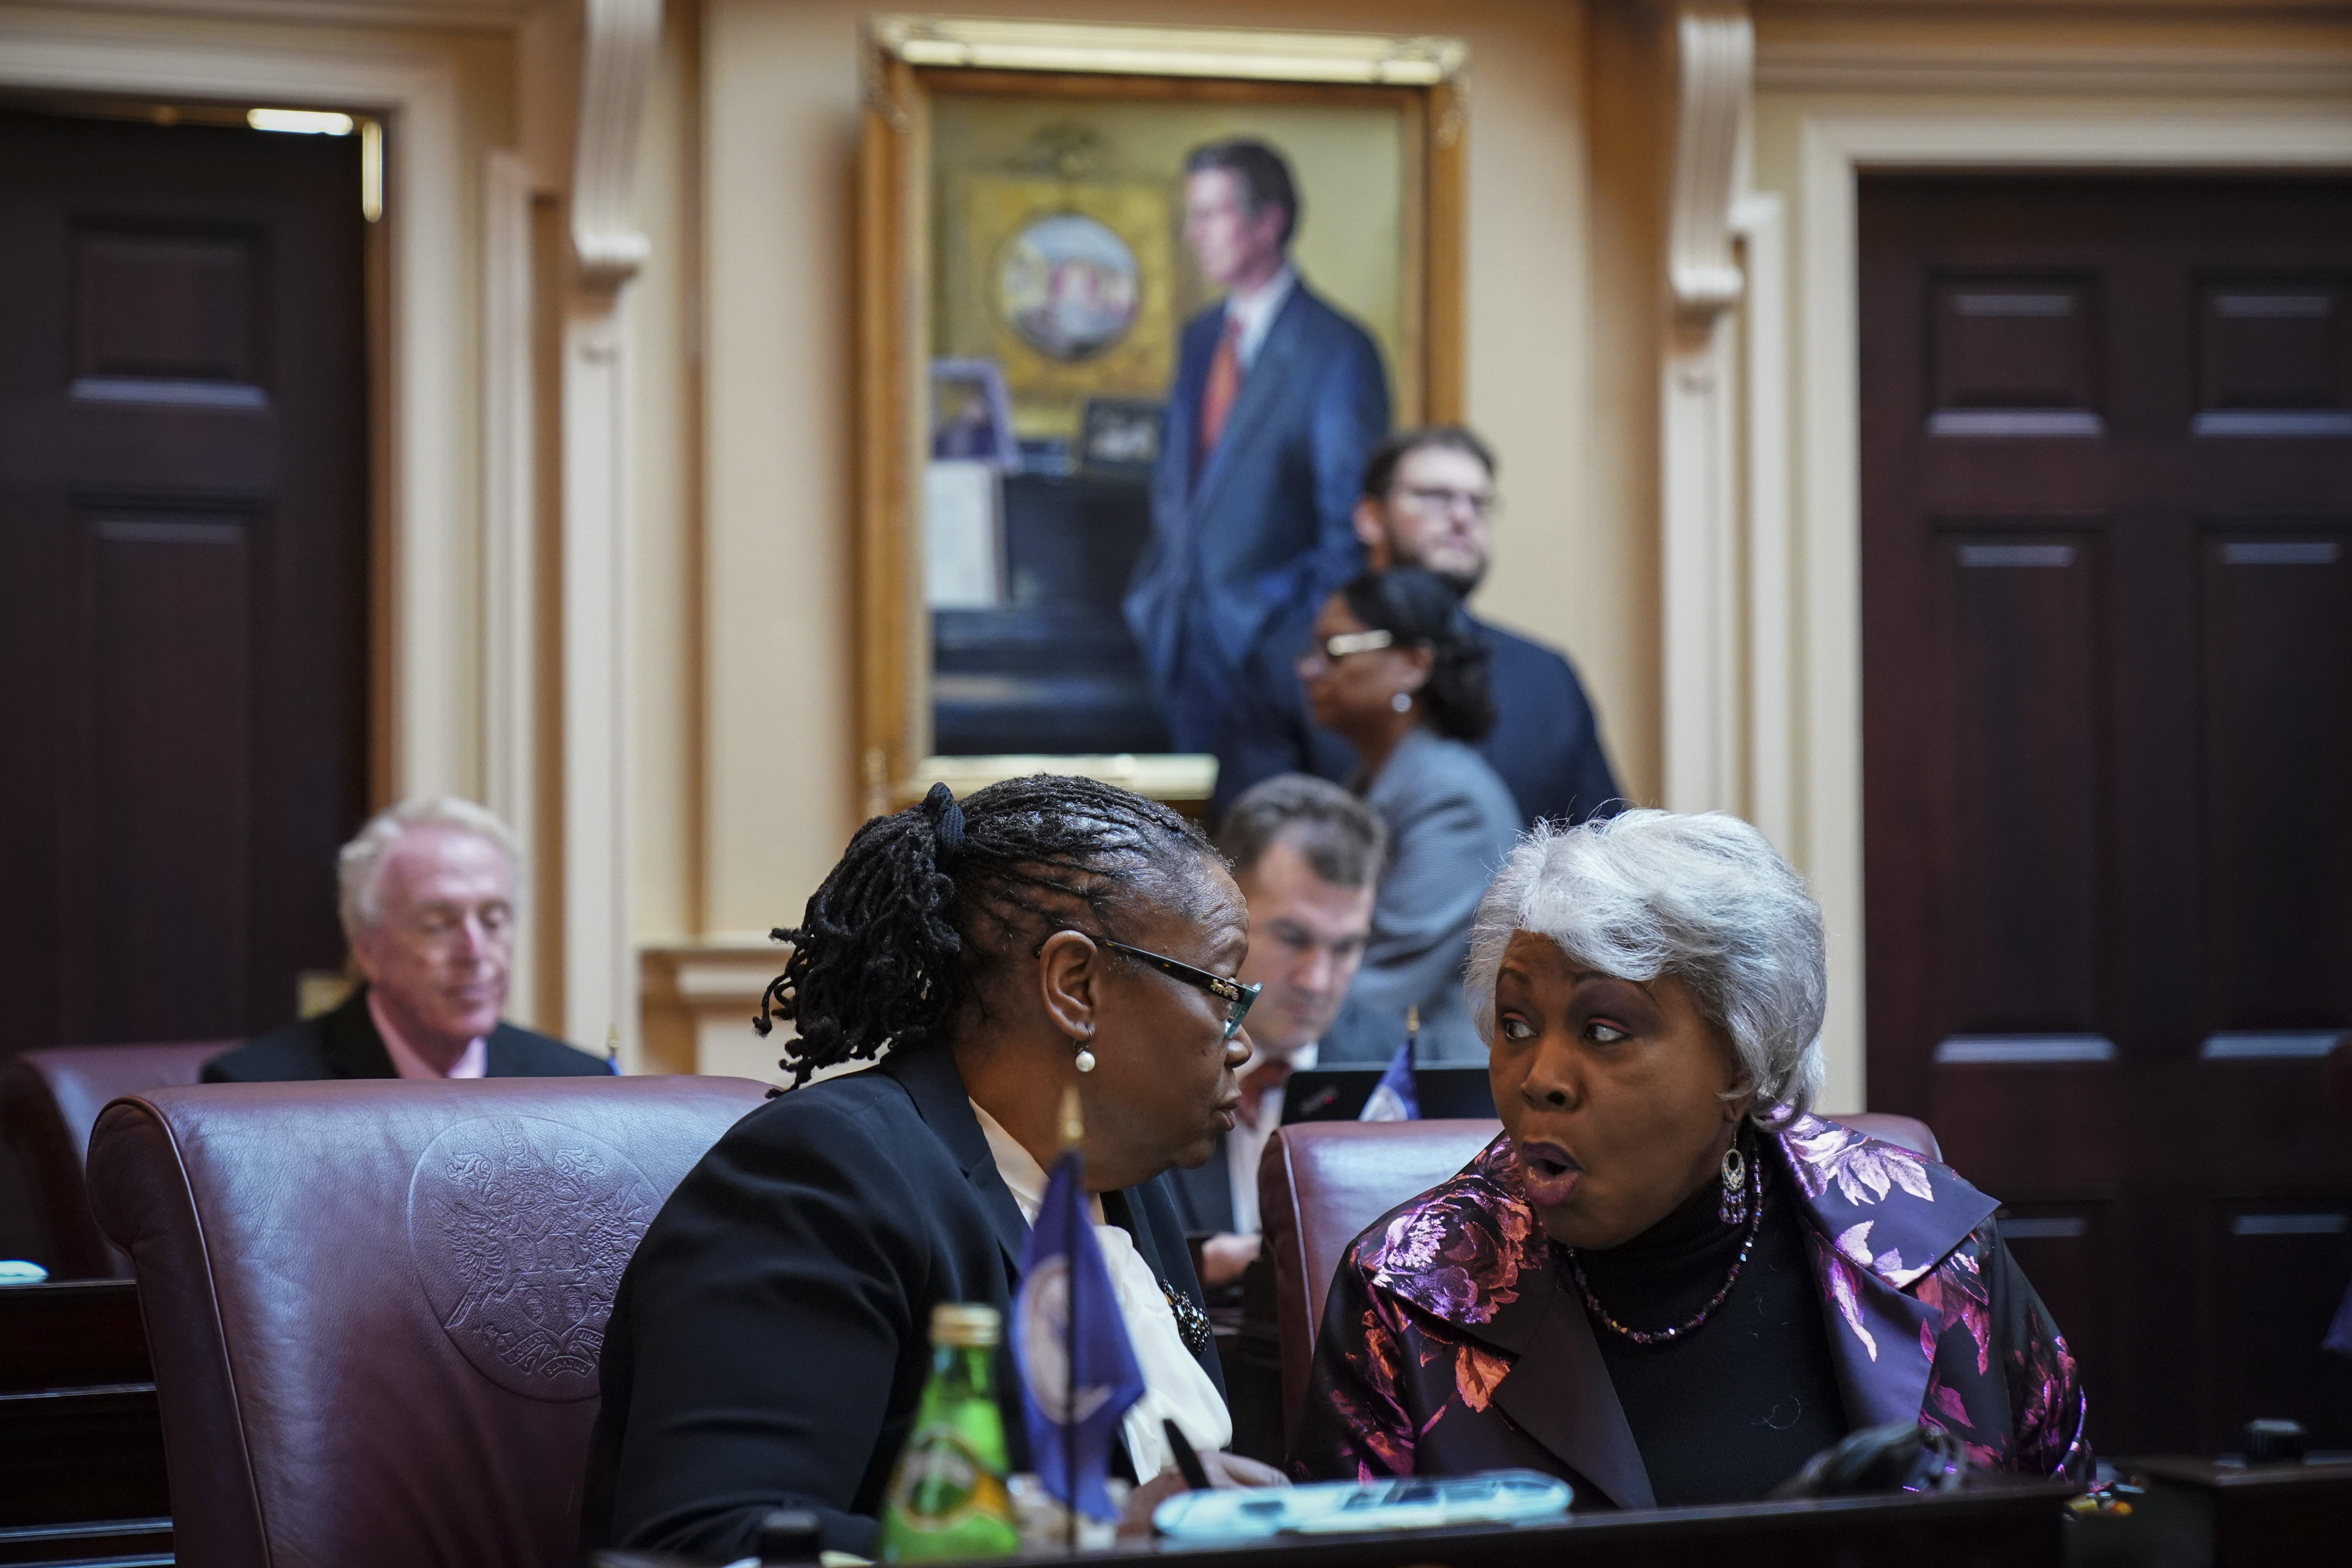 RICHMOND, VA - FEBRUARY 07: (L-R) State Senators Mamie Locke and L. Louise Lucas, both Democrats and members of the Virginia Legislative Black Caucus, speak to each other on the Senate floor at the Virginia State Capitol, February 7, 2019 in Richmond, Virginia. Virginia state politics are in a state of upheaval, with Governor Ralph Northam and State Attorney General Mark Herring both admitting to past uses of blackface and Lt. Governor Justin Fairfax accused of sexual misconduct. (Photo by Drew Angerer/Getty Images)